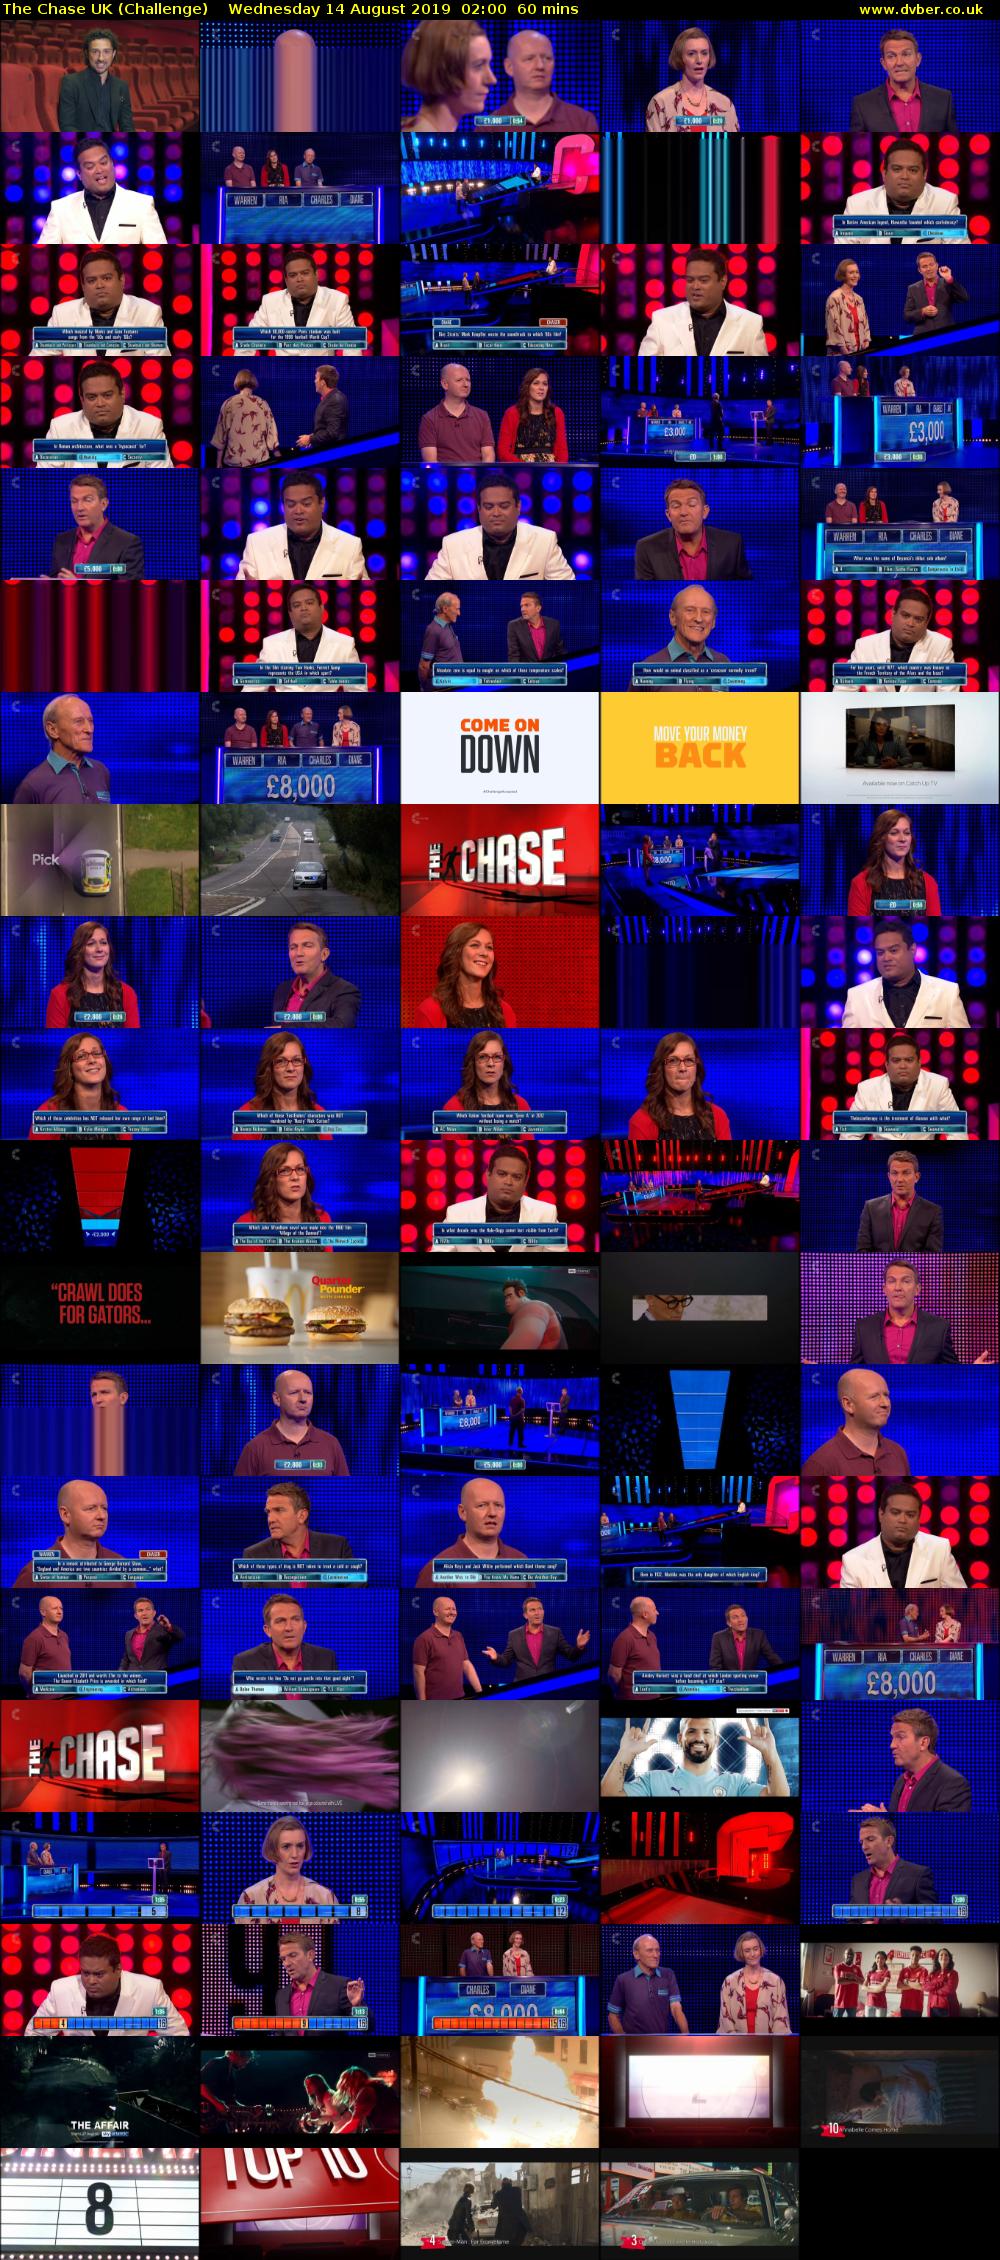 The Chase UK (Challenge) Wednesday 14 August 2019 02:00 - 03:00